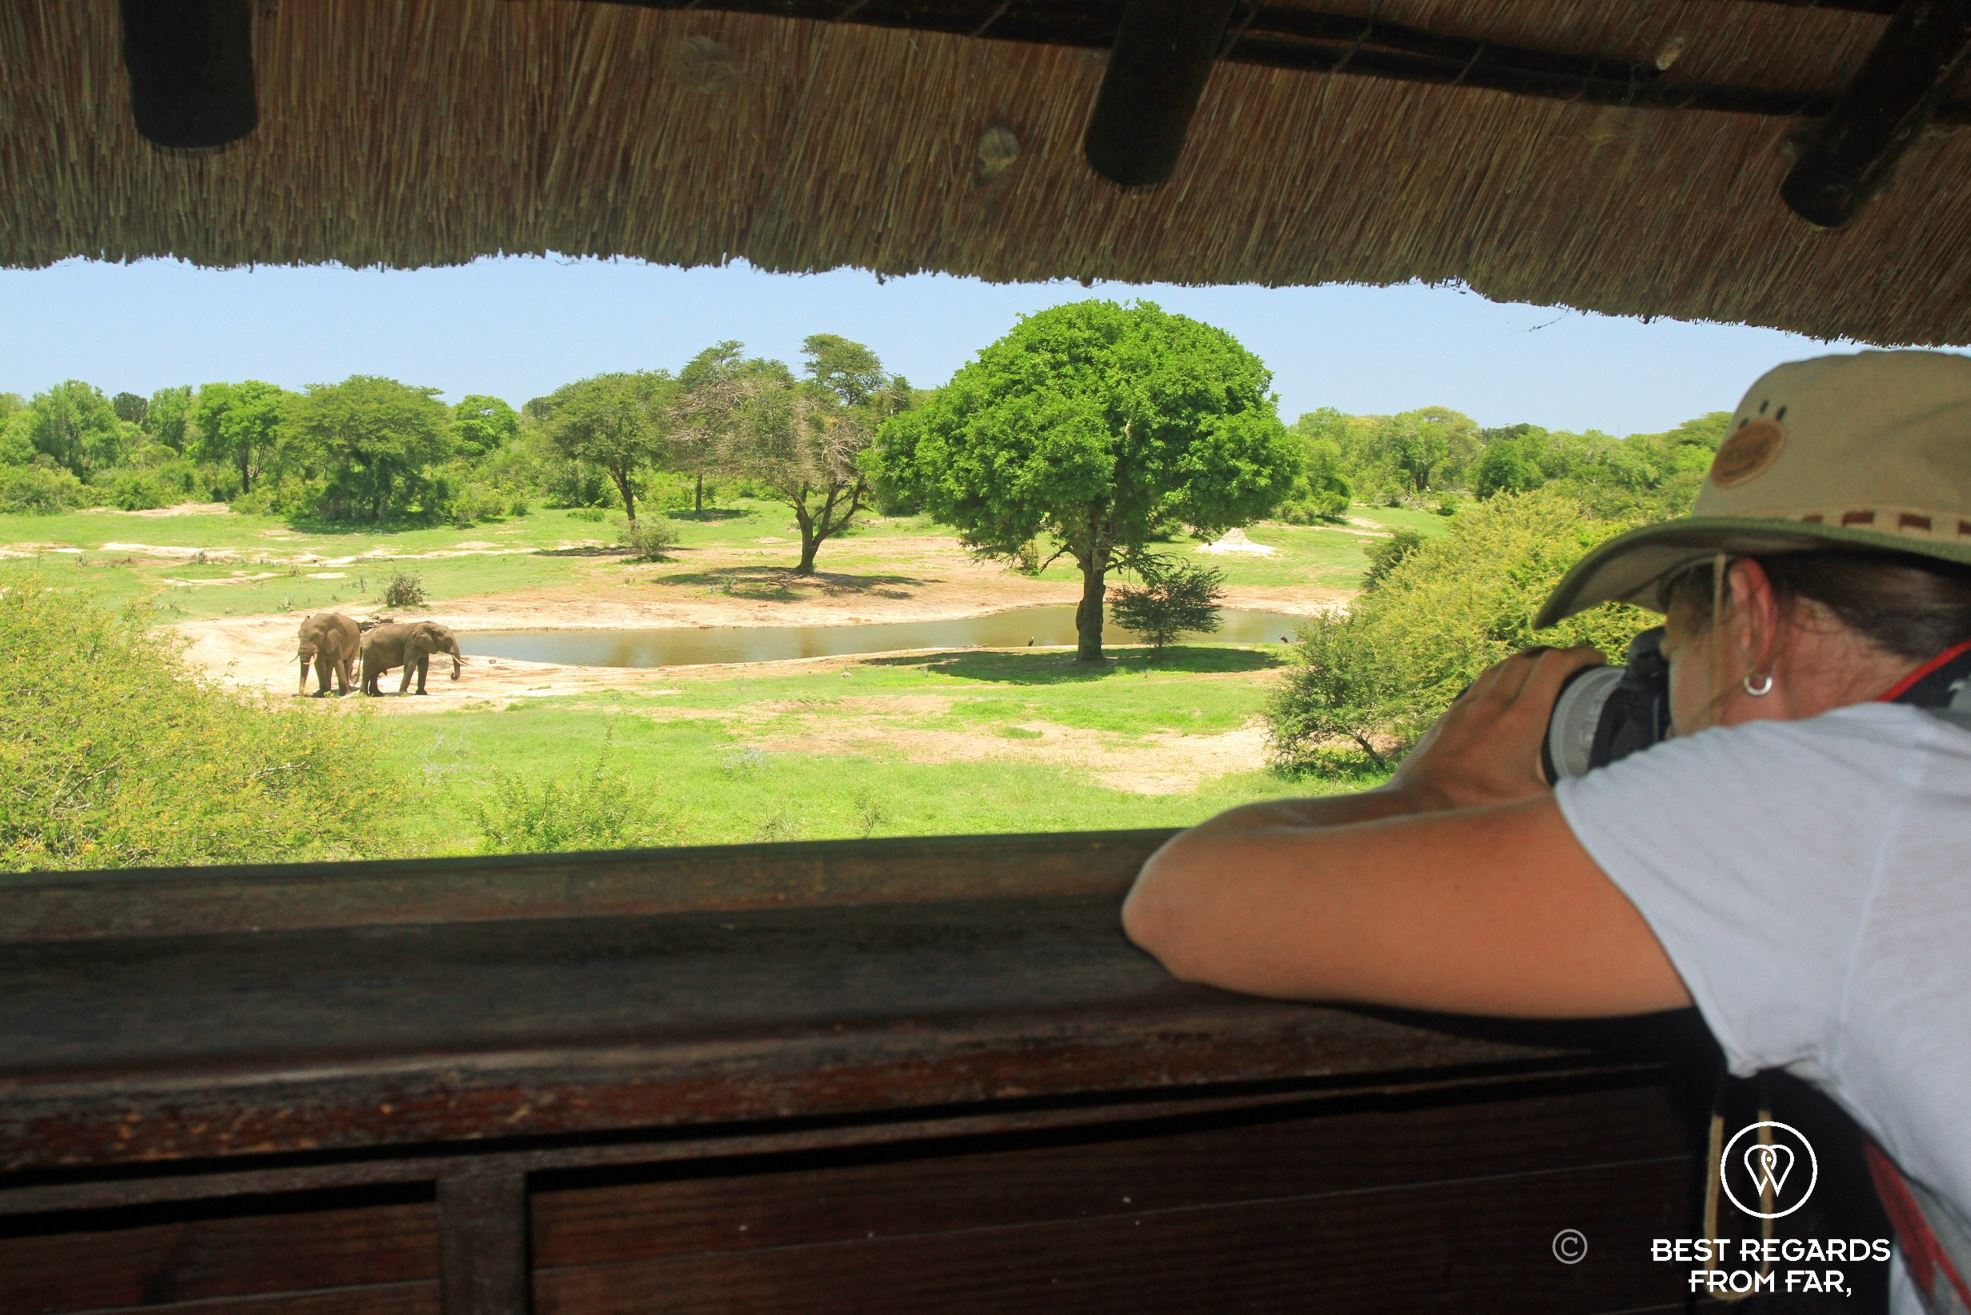 Photographer Marcella van Alphen photographing elephants from an observation deck, Tembe Elephant Park, South Africa.